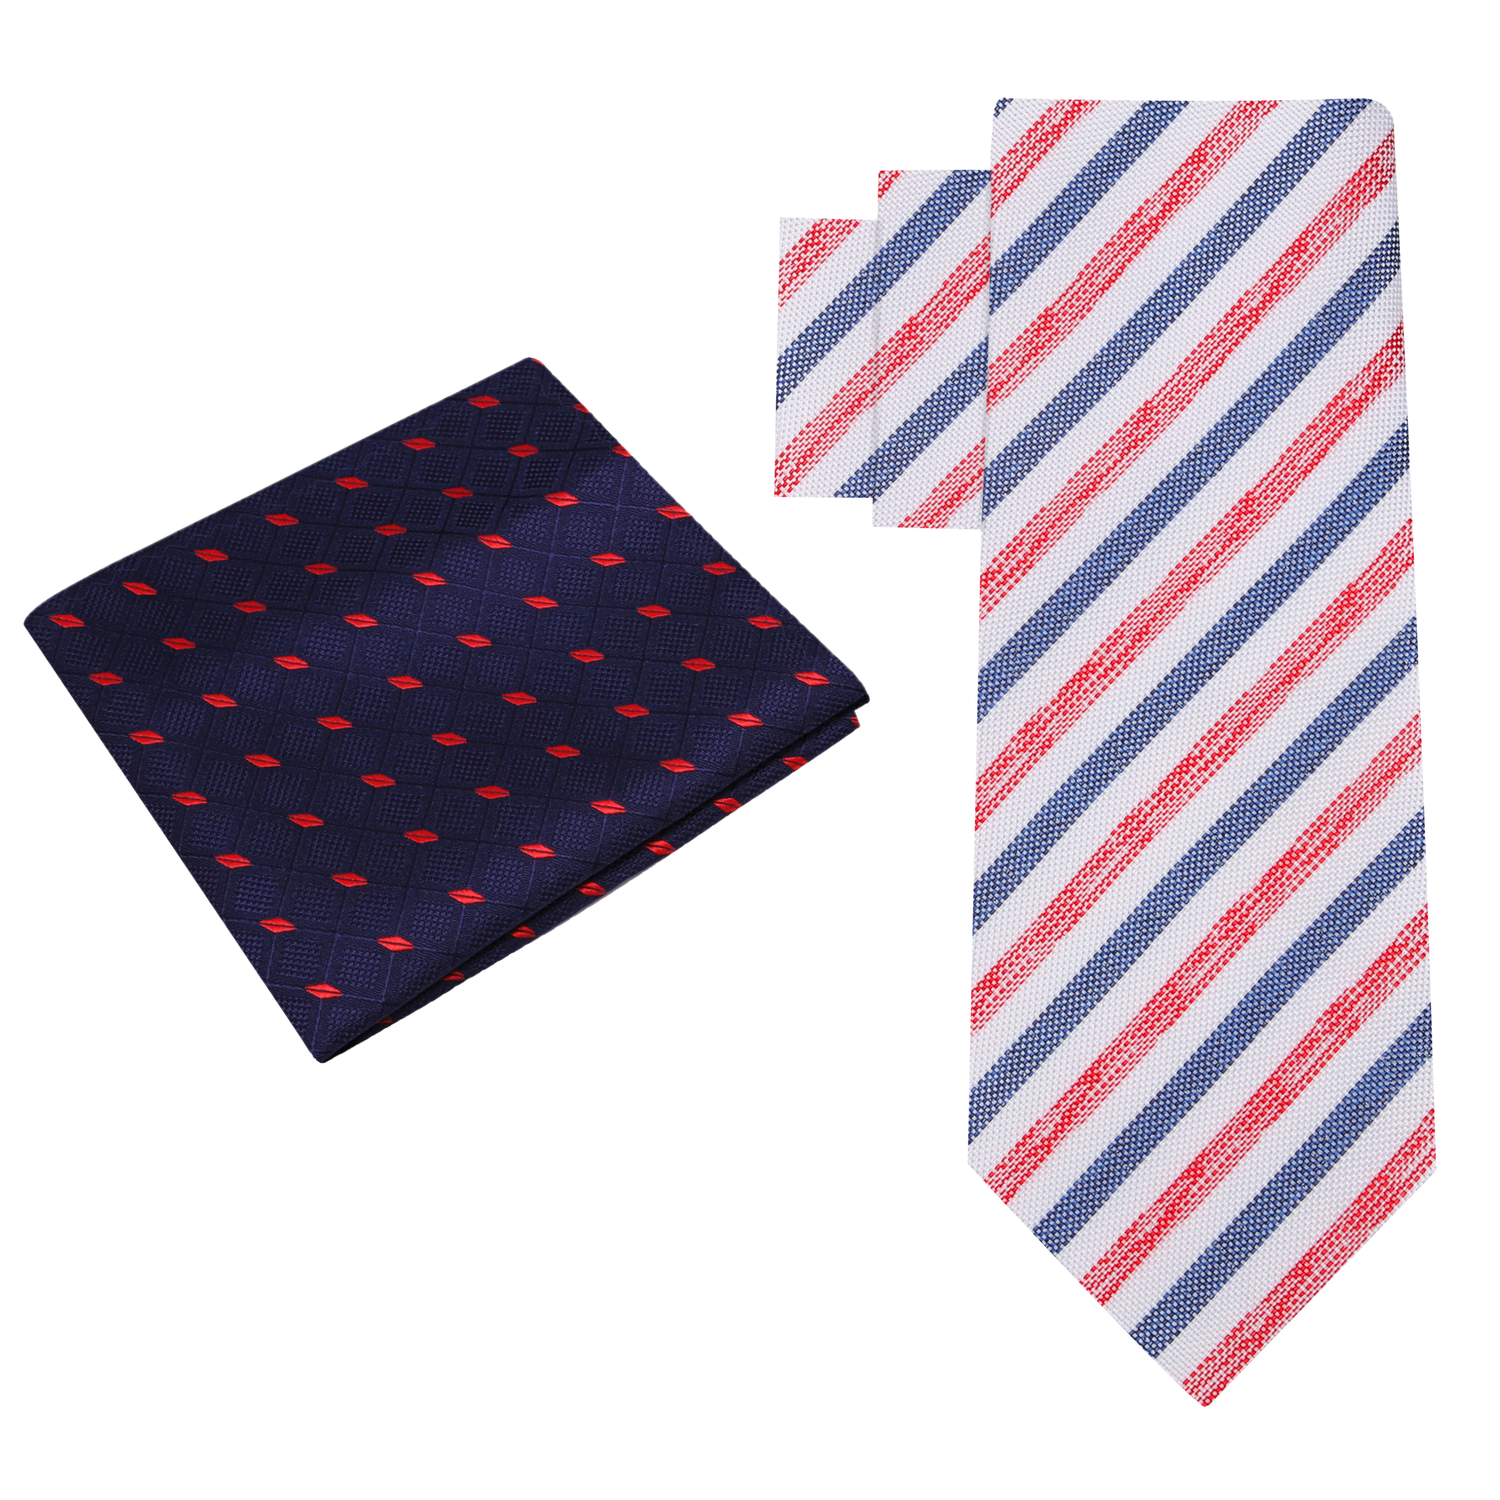 Alt View: White with Blue and Red Stripes Necktie with Blue Red Diamonds Square